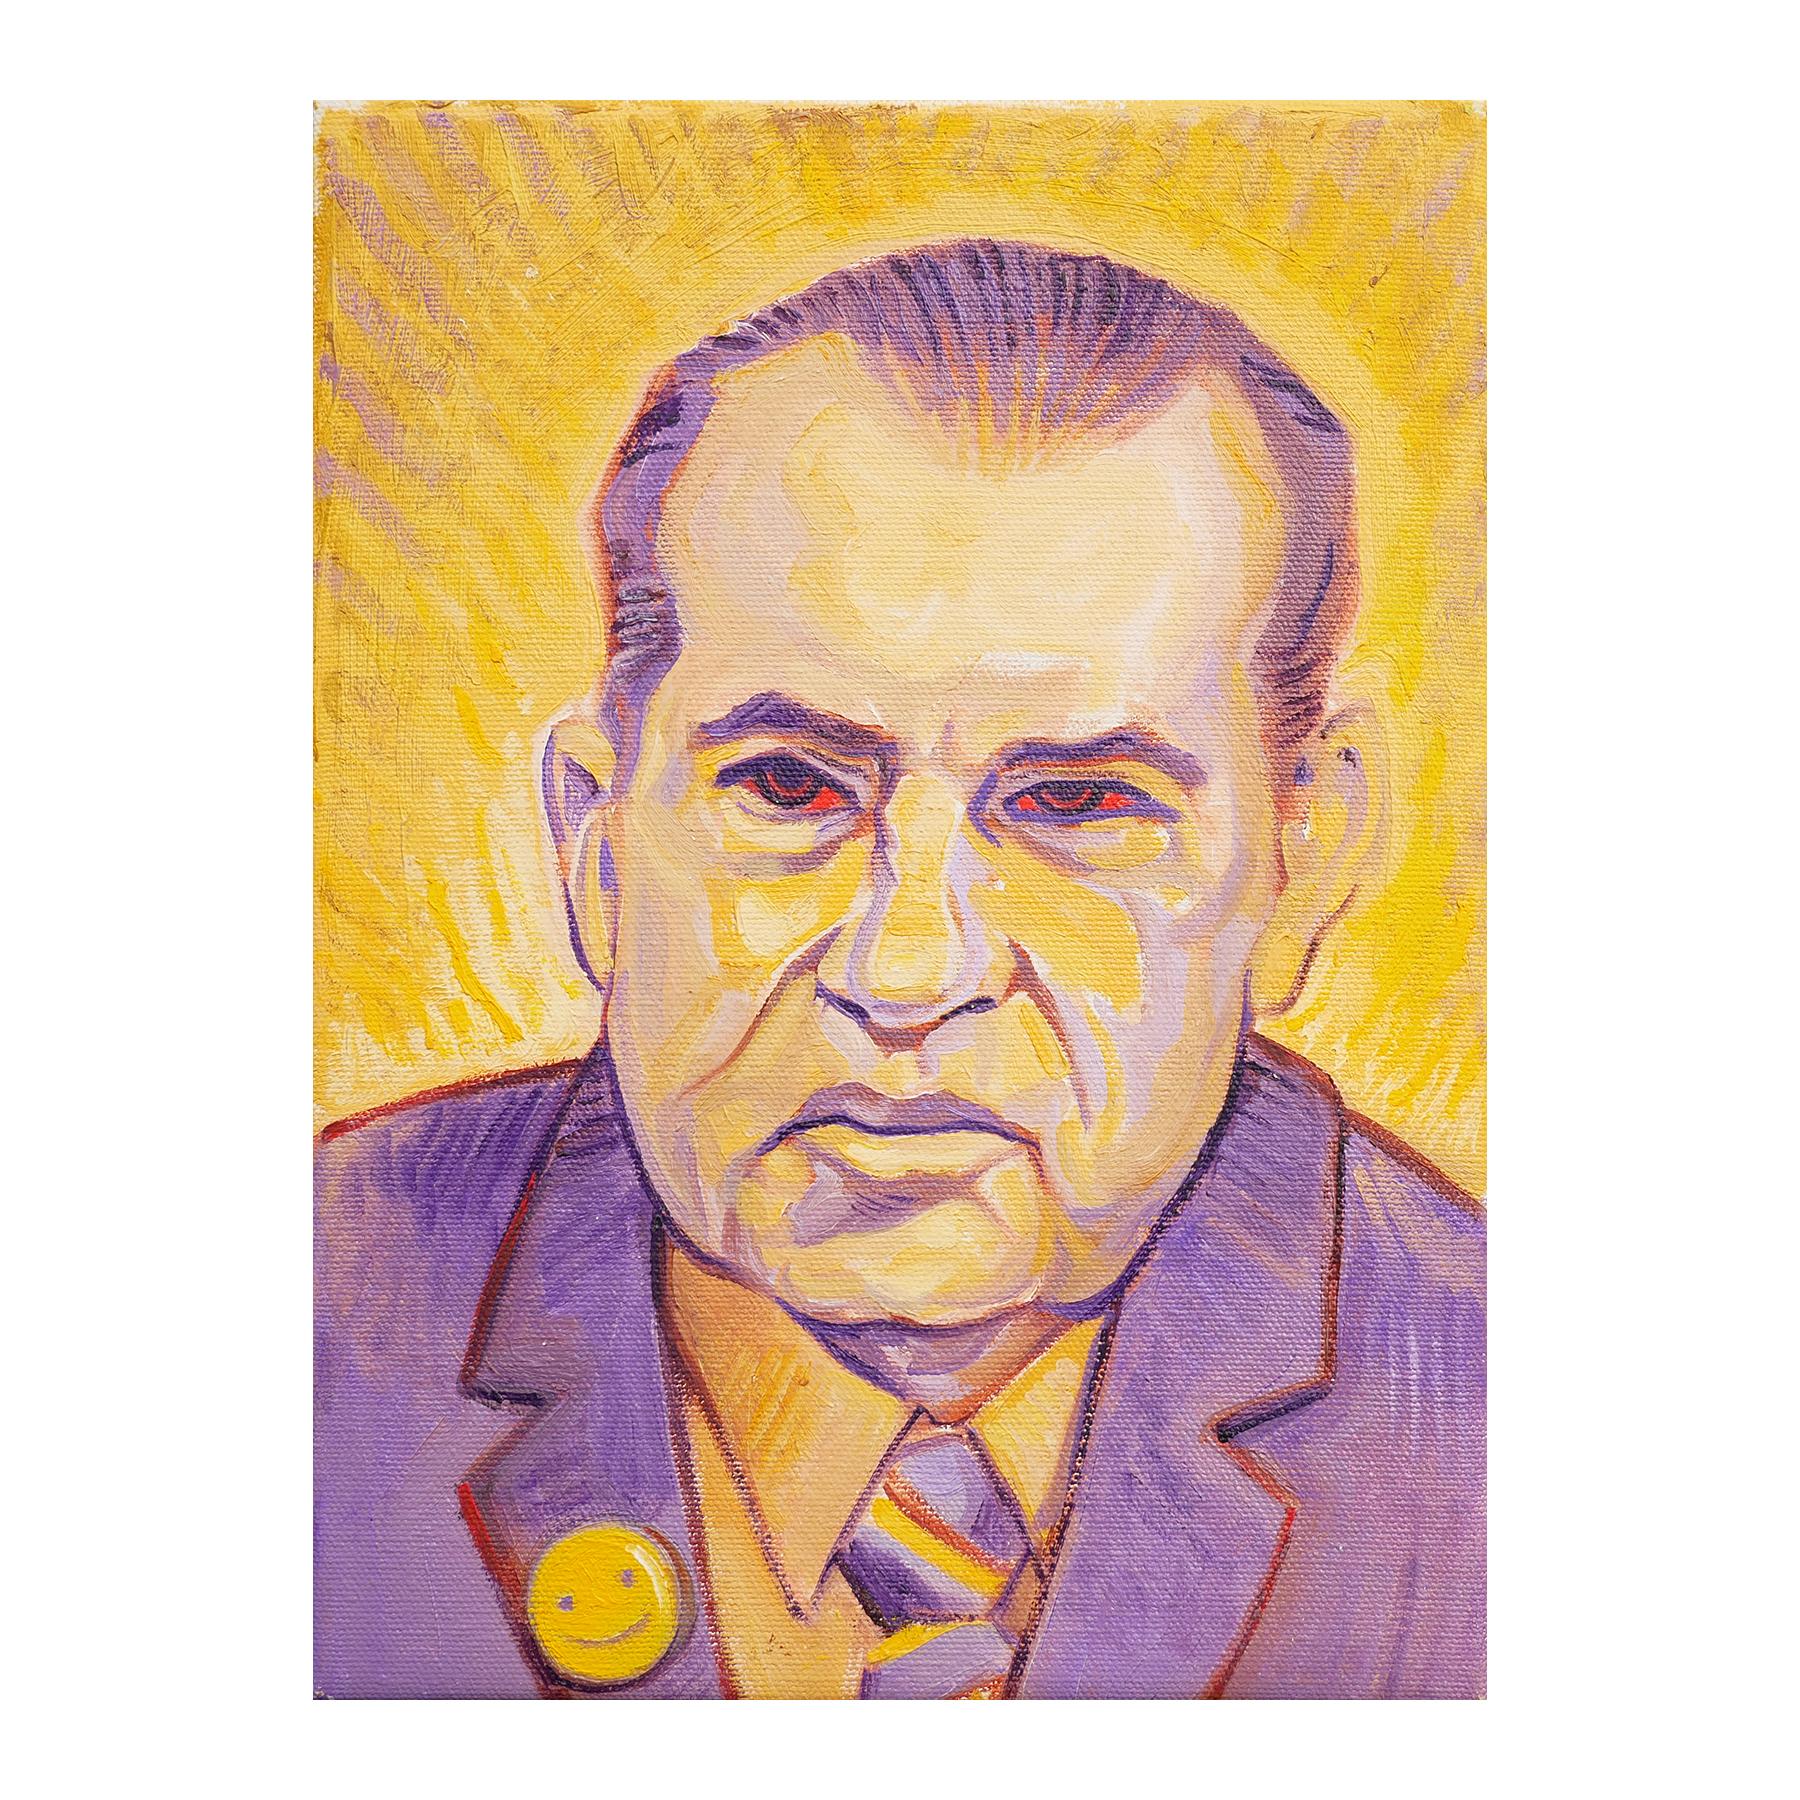 Vivid purple and yellow toned painting done by contemporary artist Henry David Potwin. This work features a life-size figure of the head of Richard Nixon with yellow and purple features and bright, red eyes. He is dressed in a bright purple suit